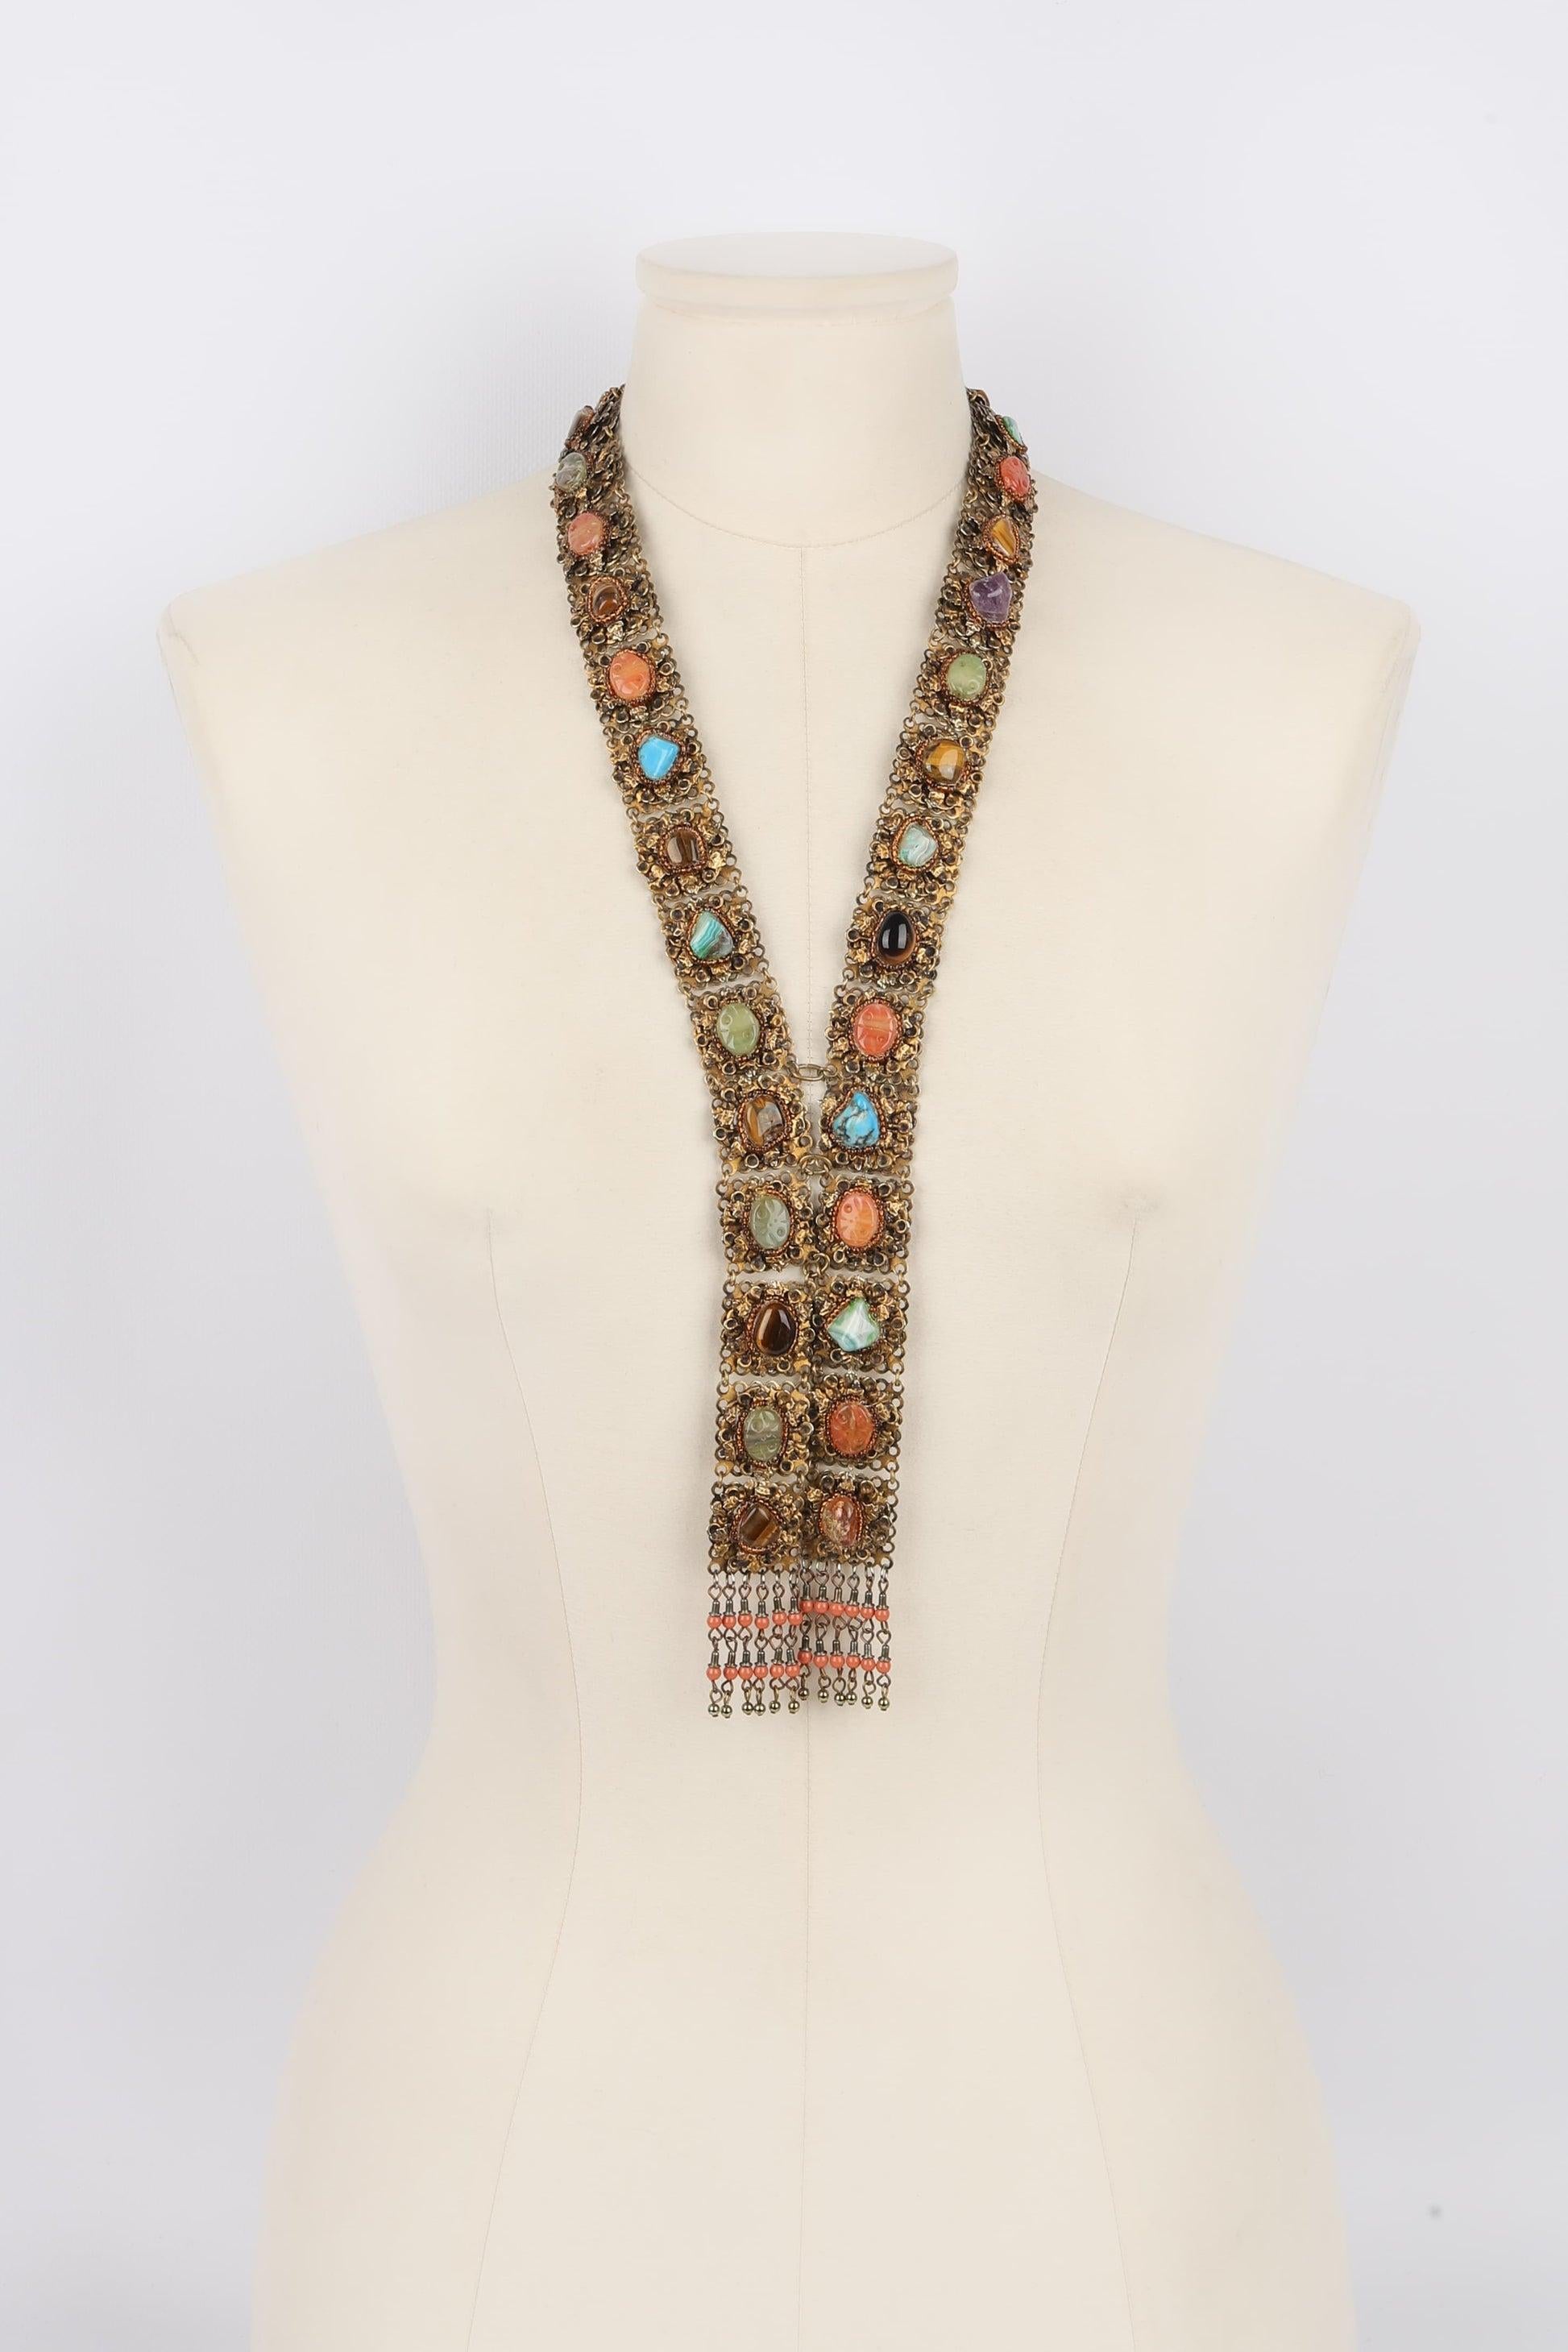 Yves Saint Laurent - Golden metal articulated necklace with an antique gold color and hardstone cabochons. Haute Couture jewelry from the 1960s.

Additional information:
Condition: Very good condition
Dimensions: from 60 cm to 66 cm
Period: 20th